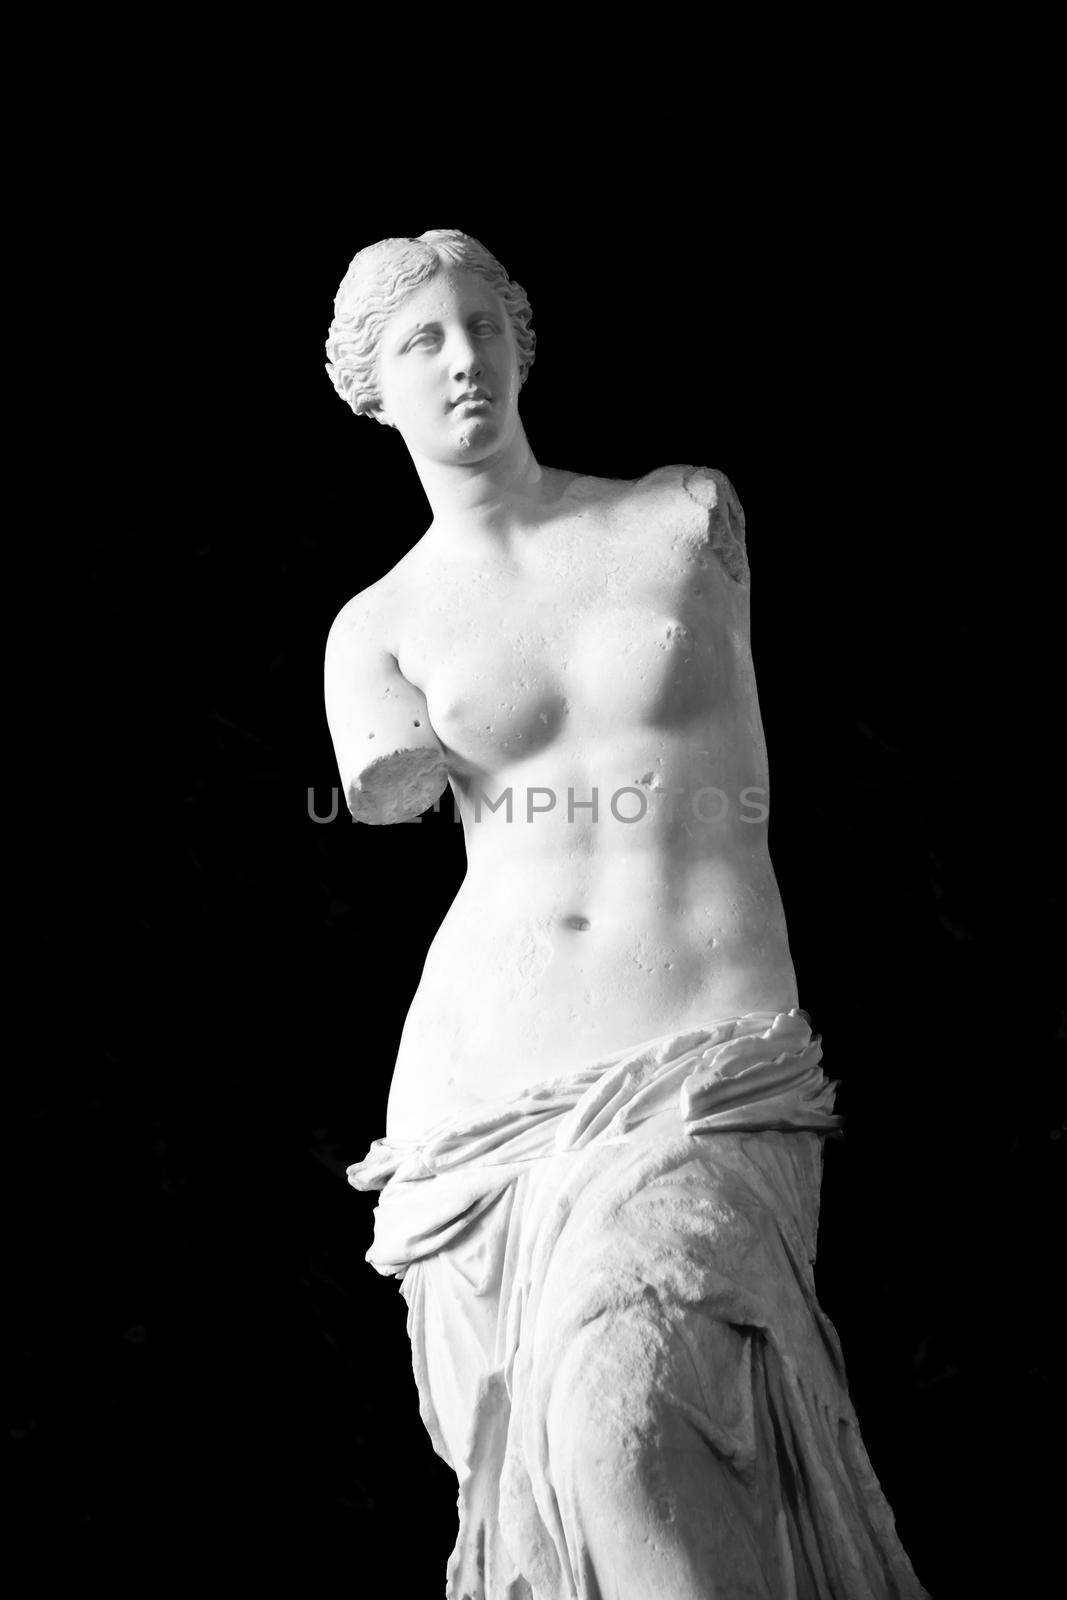 Venus de Milo, ancient statue commonly thought to represent Aphrodite by Perseomedusa